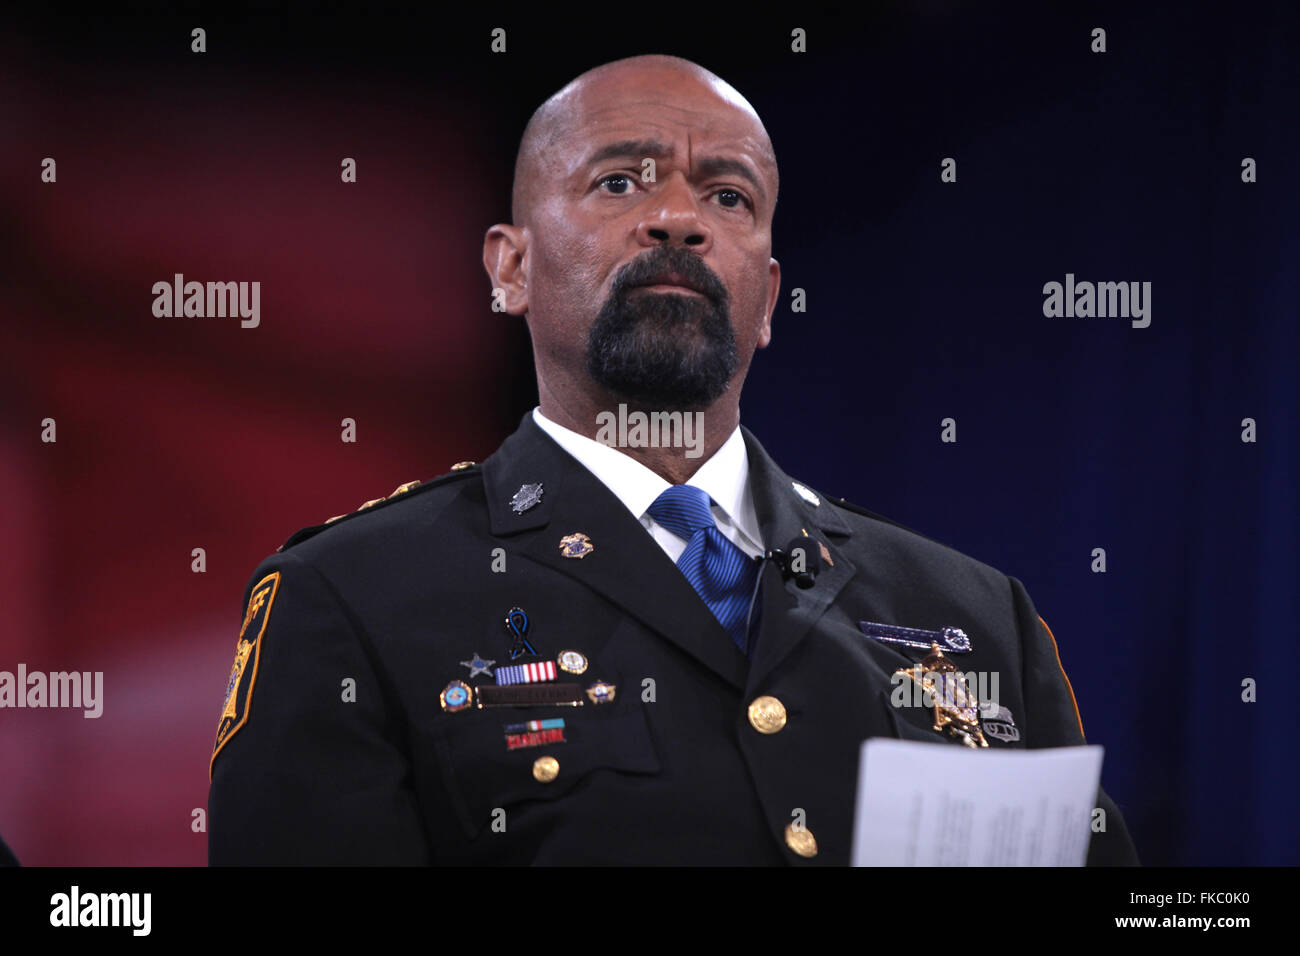 Sheriff of Milwaukee County David Clarke during the annual American Conservative Union CPAC conference at National Harbor March 3, 2016 in Oxon Hill, Maryland. Stock Photo